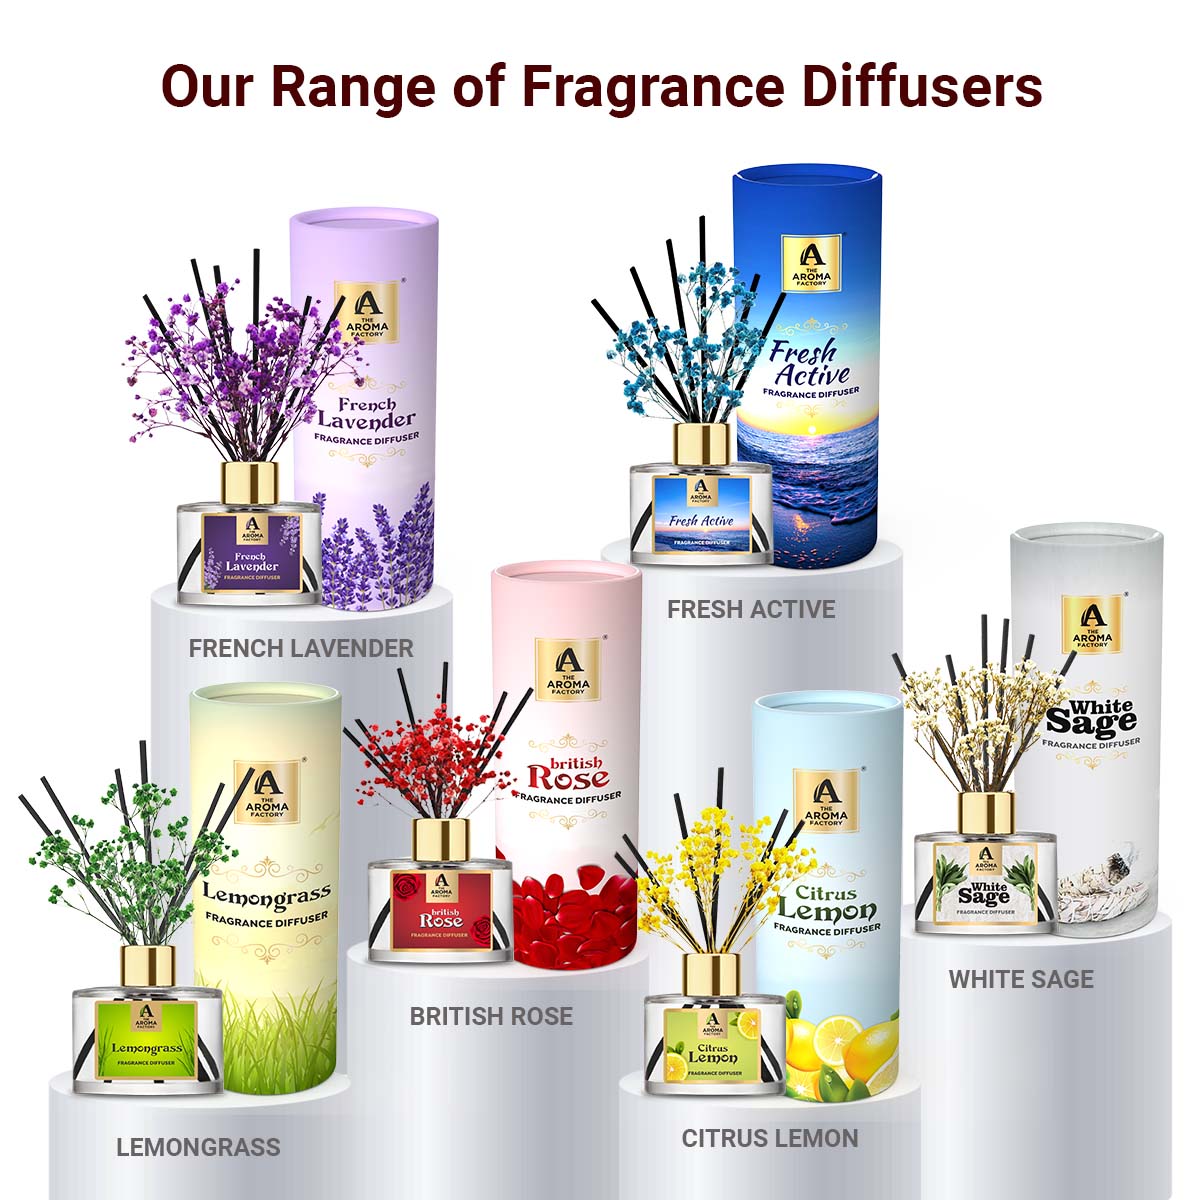 The Aroma Factory Happy Birthday Bhabhi Gift with Card, Fresh Active Fragrance Reed Diffuser Set (1 Box + 1 Card)